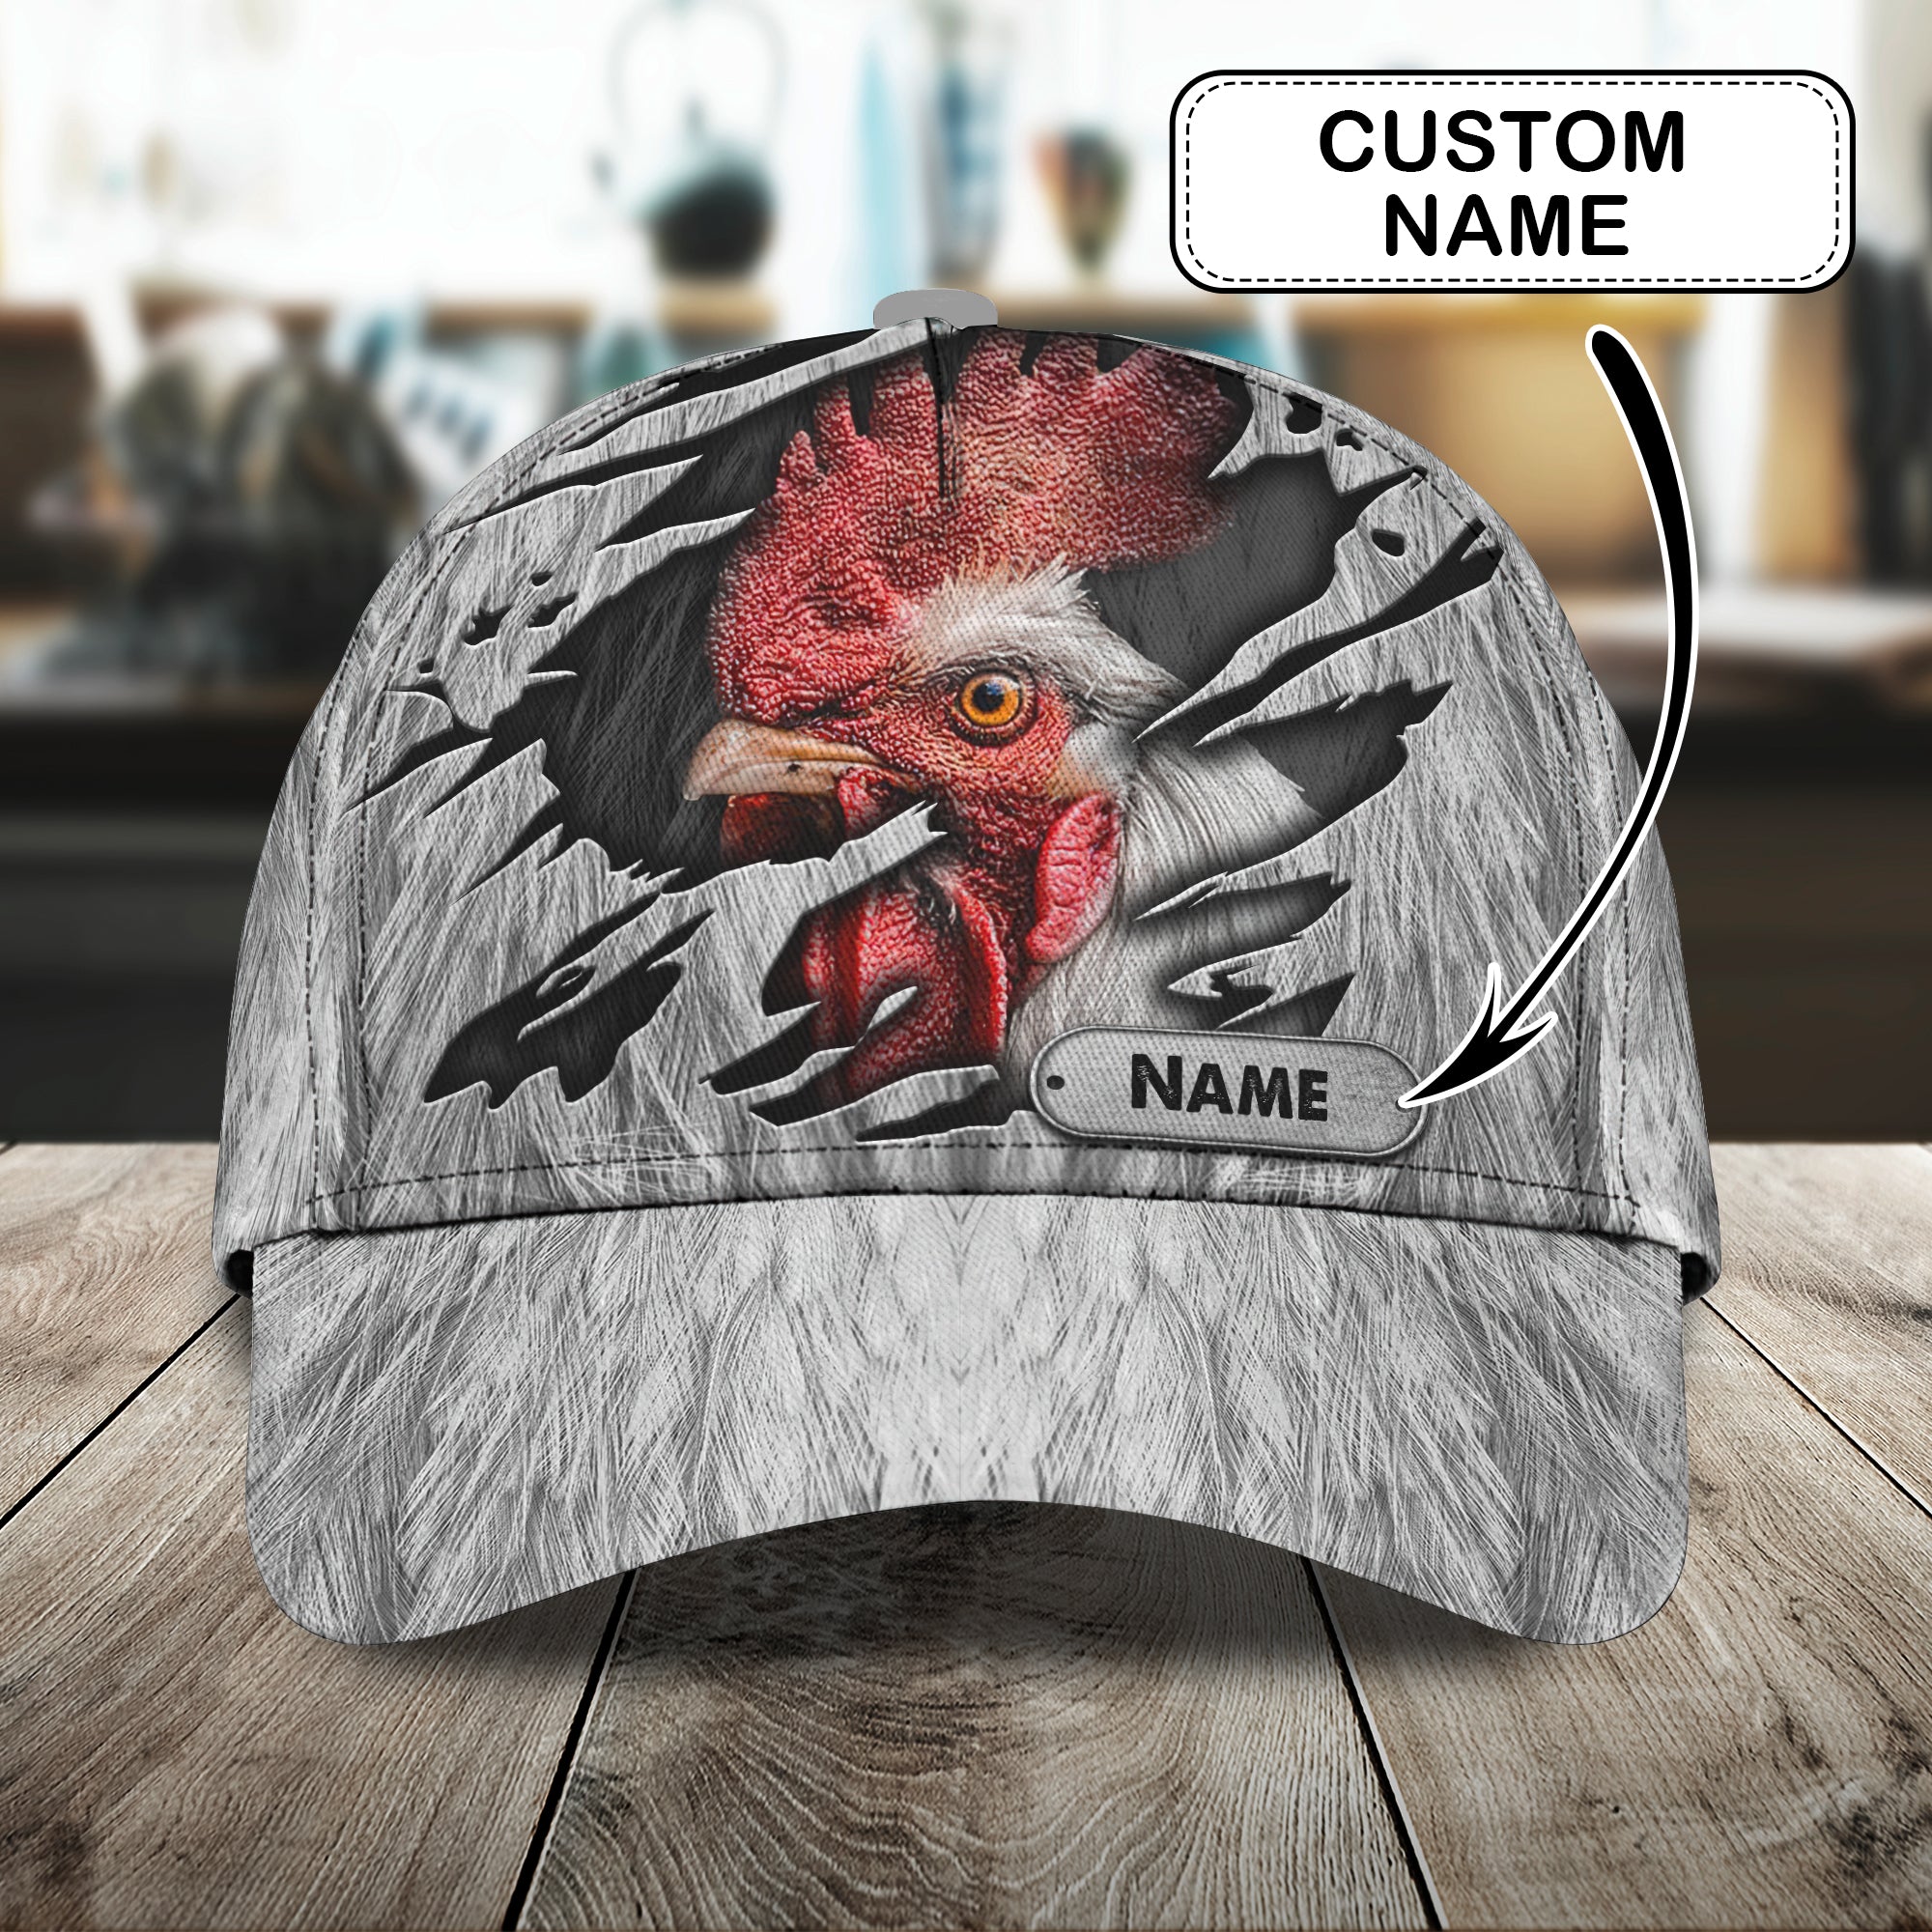 Rooster- Personalized Name Cap - Ntp -147